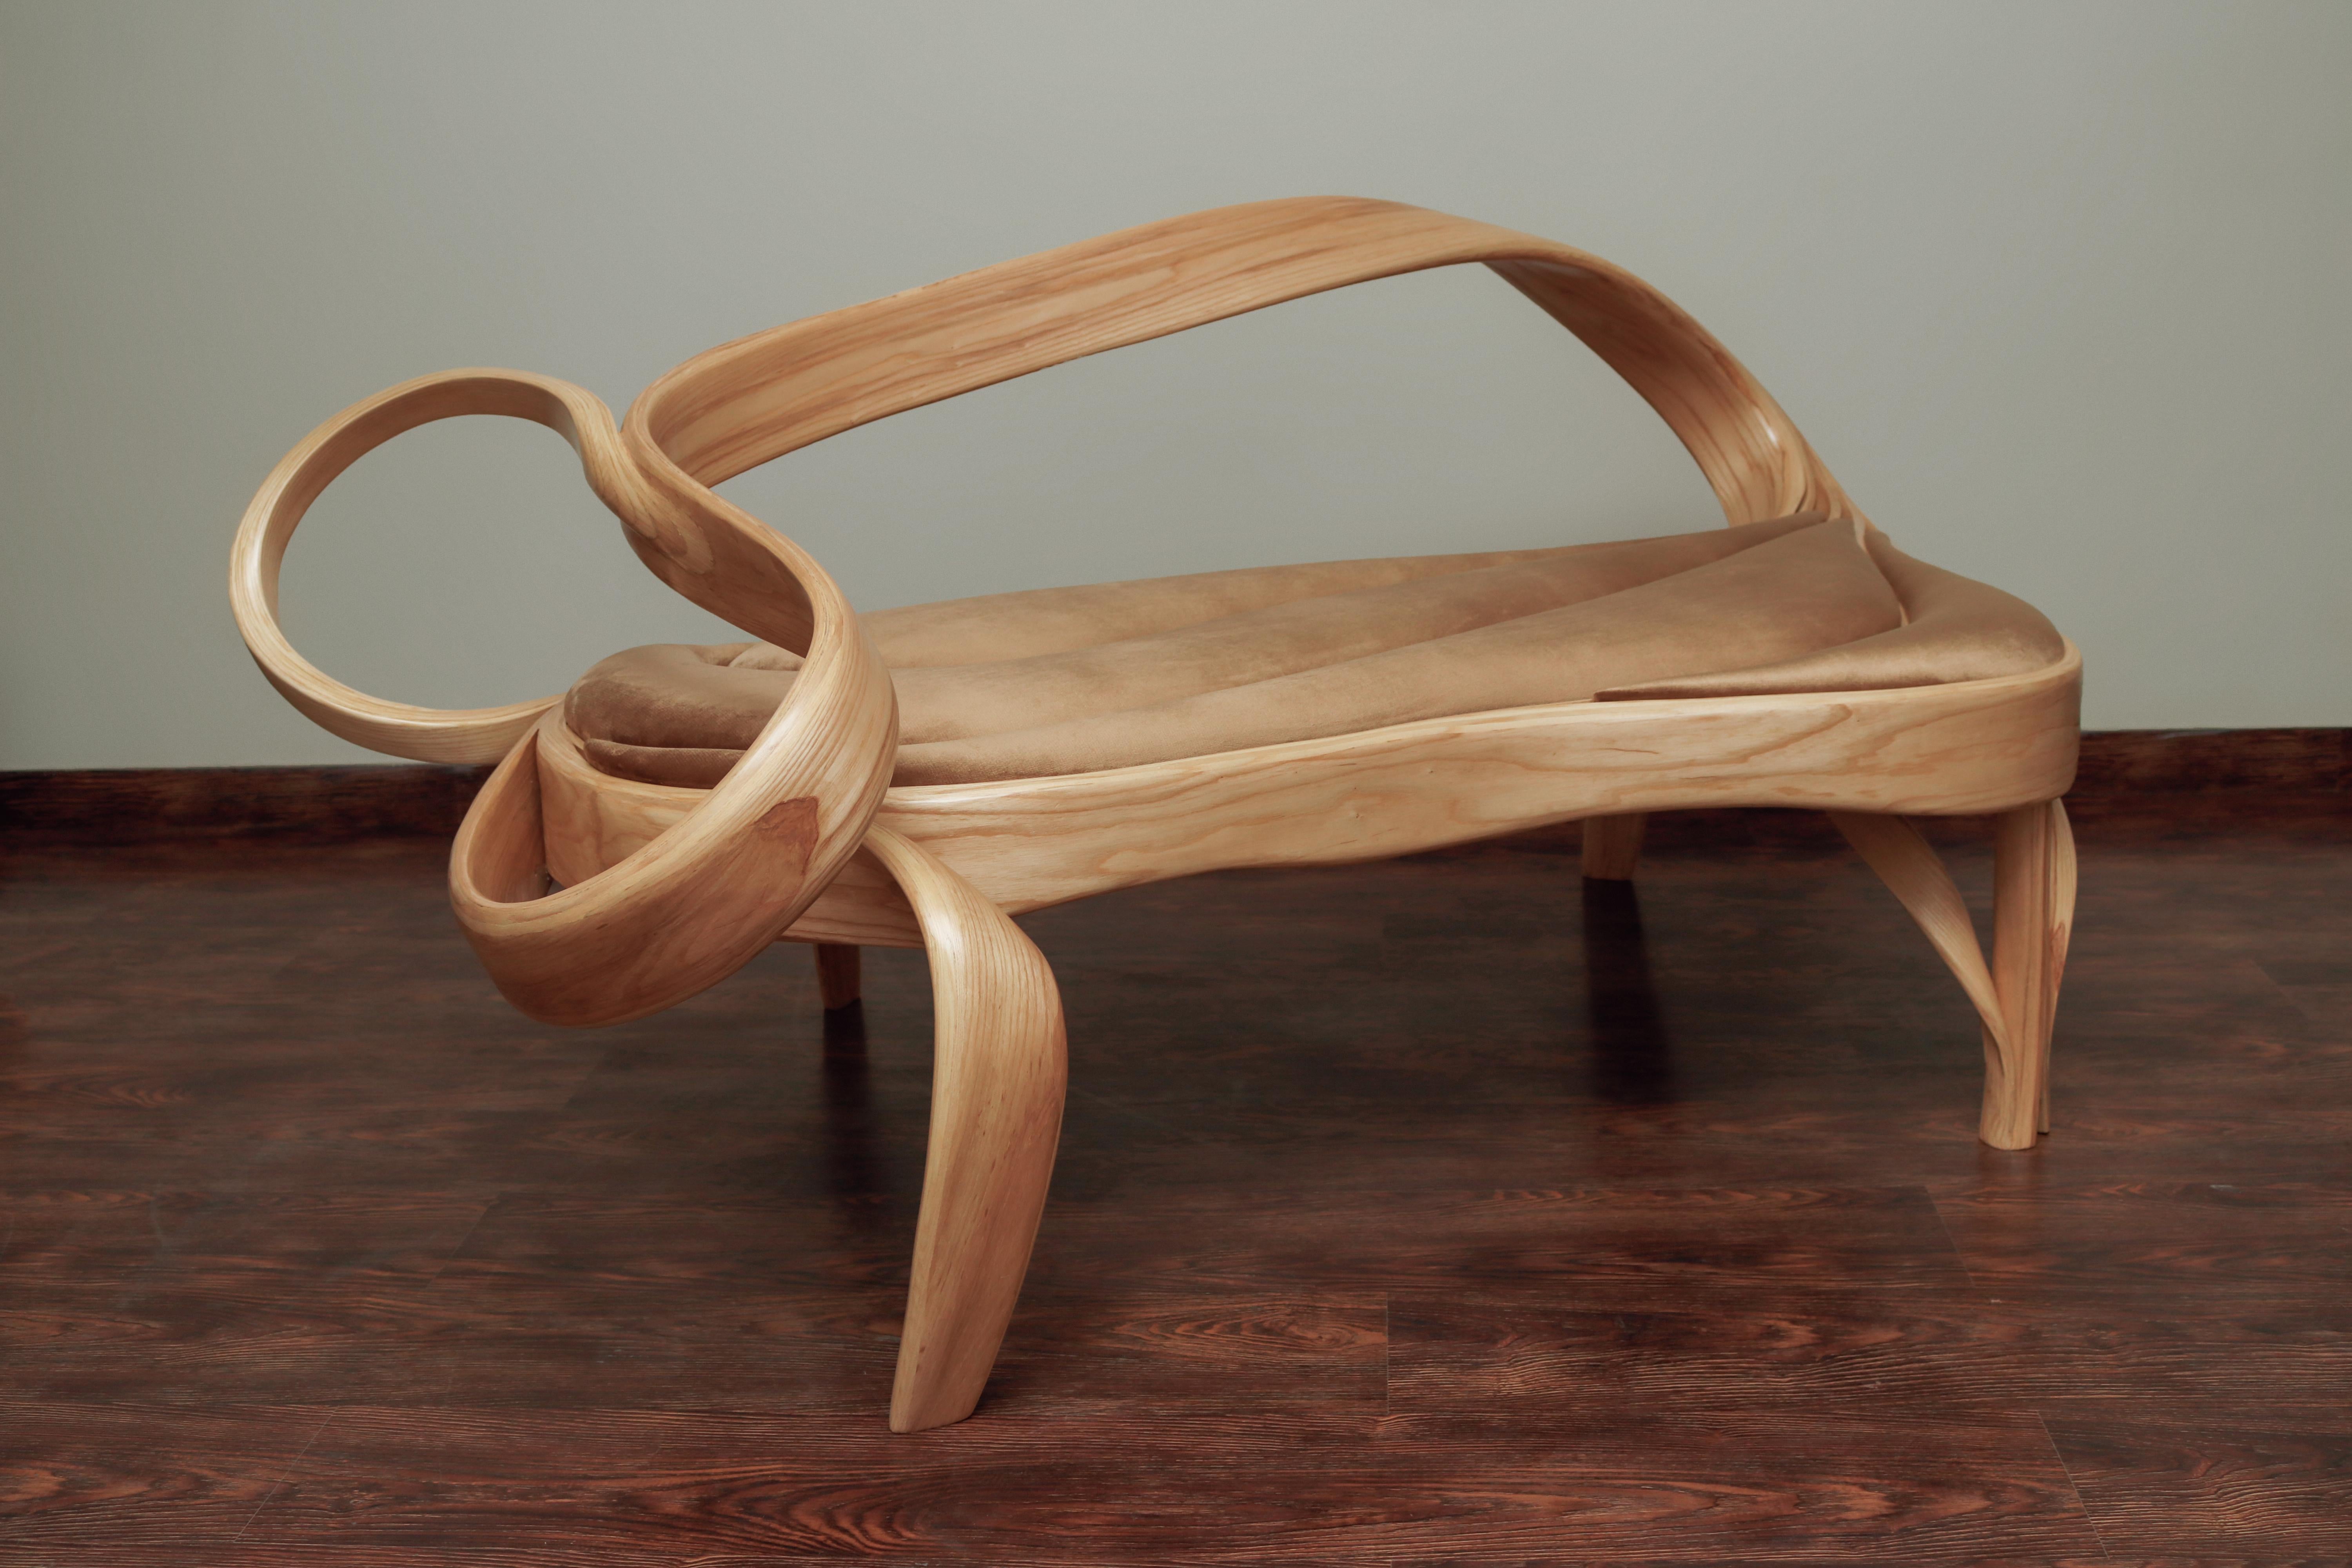 This piece features a unique design element where the main frame and the inner layers of wood converge to create the back-rest of the piece in a natural flow. The legs of the sofa seamlessly emerge from the frame. All these elements combined create